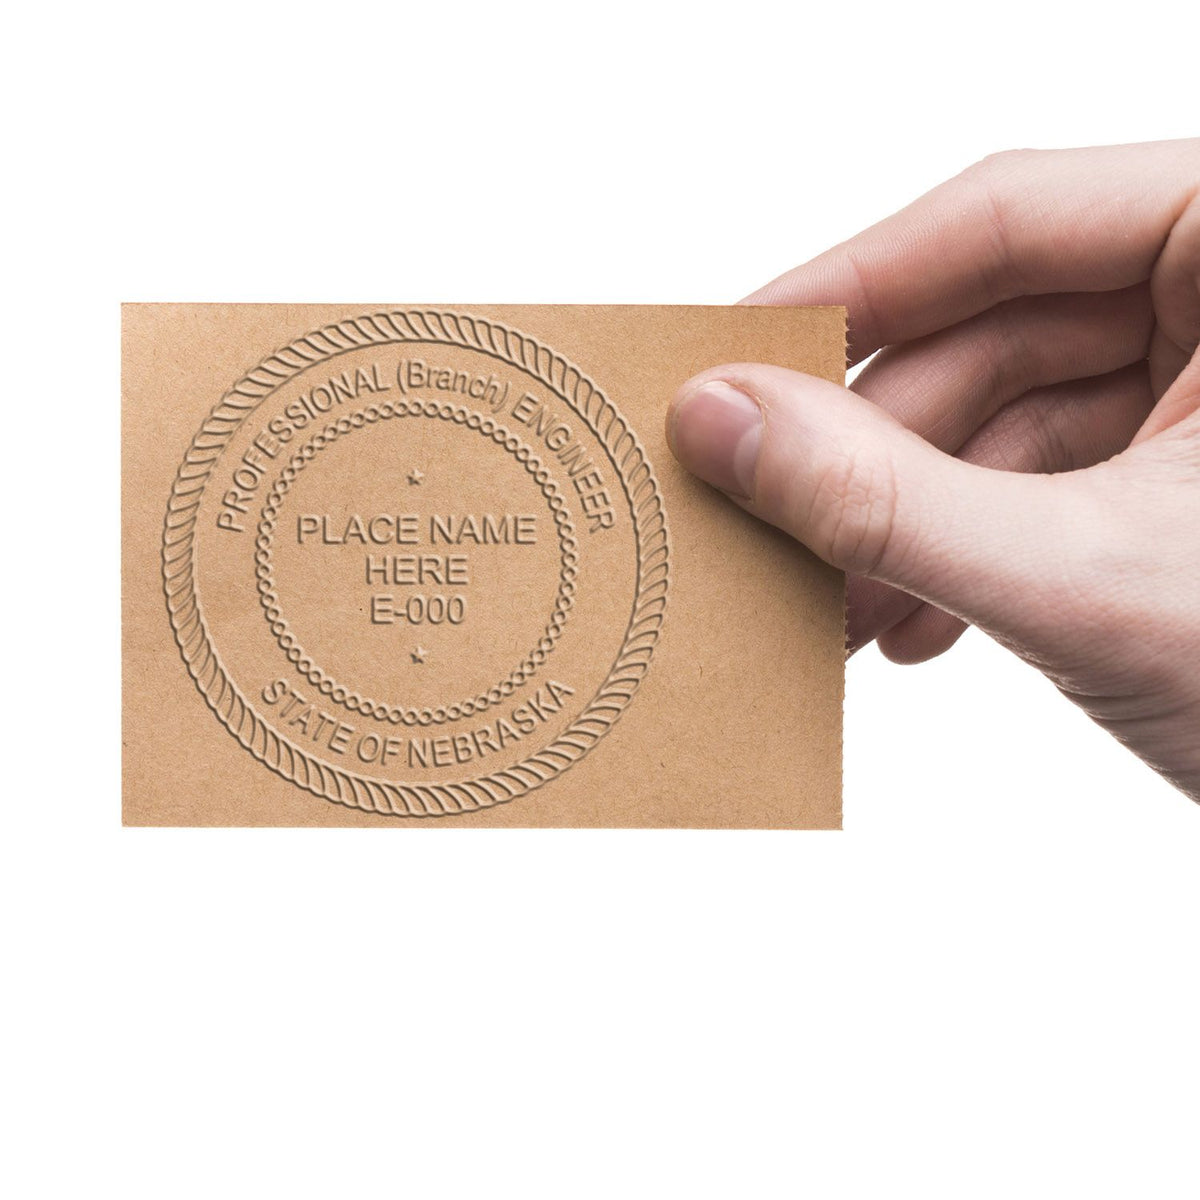 An in use photo of the Hybrid Nebraska Engineer Seal showing a sample imprint on a cardstock